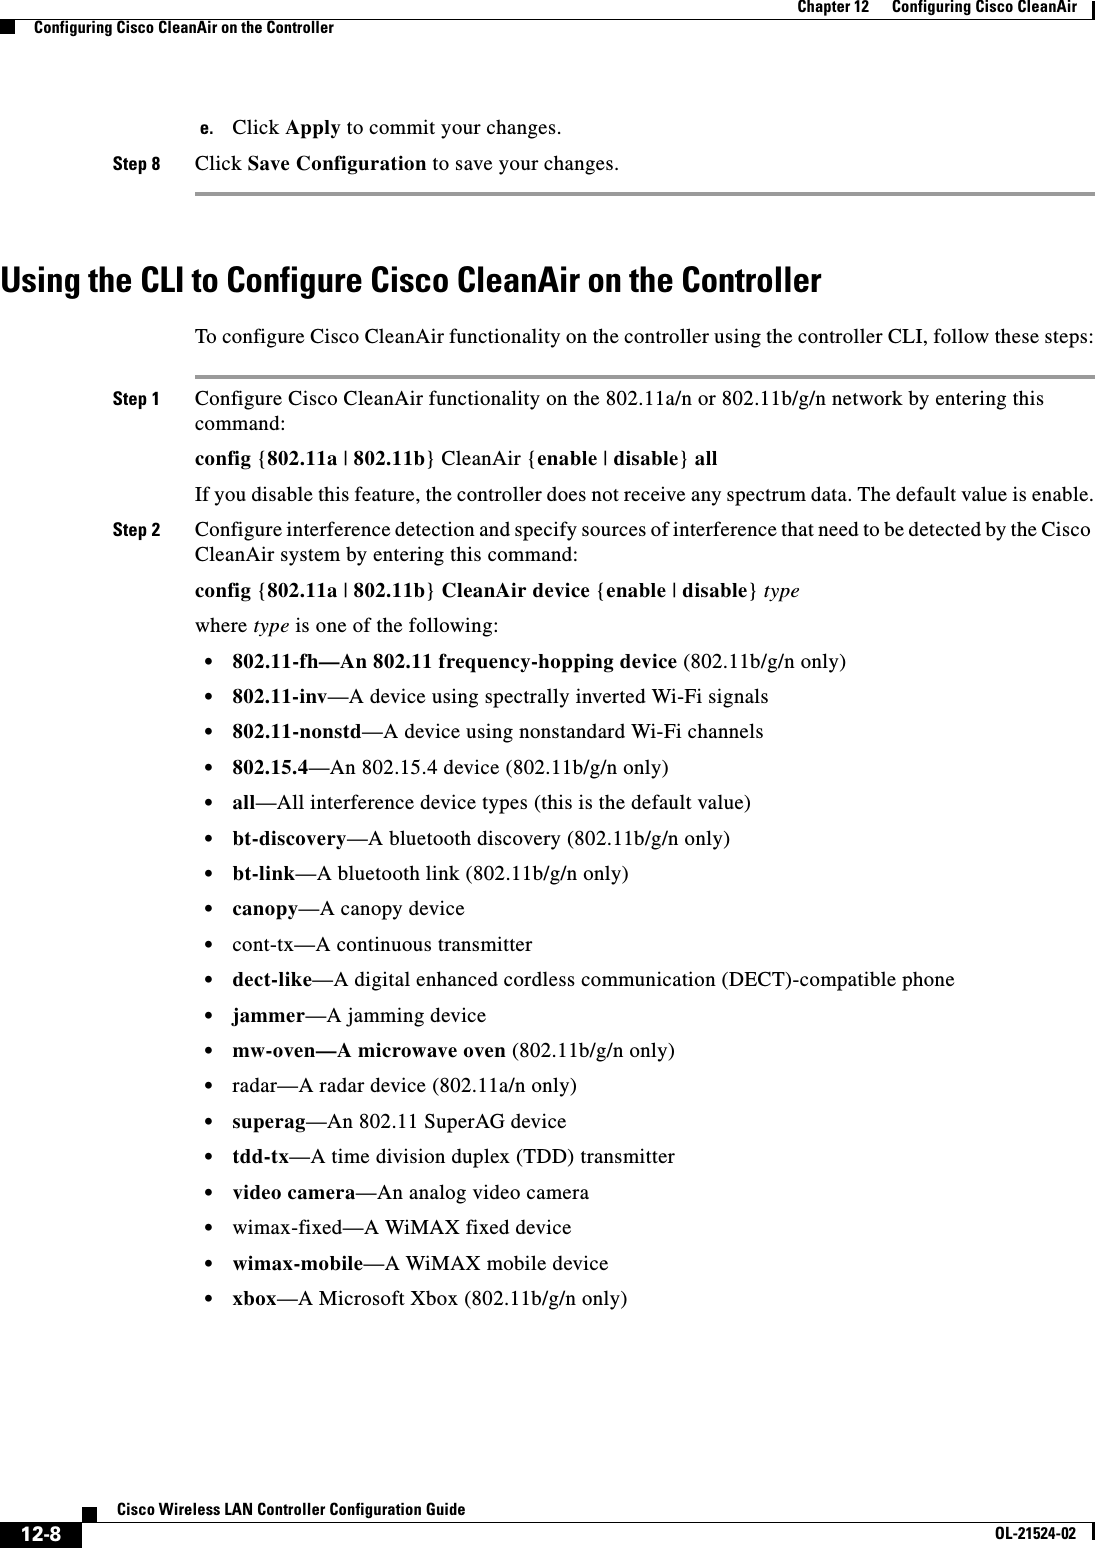  12-8Cisco Wireless LAN Controller Configuration GuideOL-21524-02Chapter 12      Configuring Cisco CleanAirConfiguring Cisco CleanAir on the Controllere. Click Apply to commit your changes.Step 8 Click Save Configuration to save your changes.Using the CLI to Configure Cisco CleanAir on the ControllerTo configure Cisco CleanAir functionality on the controller using the controller CLI, follow these steps:Step 1 Configure Cisco CleanAir functionality on the 802.11a/n or 802.11b/g/n network by entering this command:config {802.11a | 802.11b} CleanAir {enable | disable} allIf you disable this feature, the controller does not receive any spectrum data. The default value is enable.Step 2 Configure interference detection and specify sources of interference that need to be detected by the Cisco CleanAir system by entering this command:config {802.11a | 802.11b} CleanAir device {enable | disable} typewhere type is one of the following:  • 802.11-fh—An 802.11 frequency-hopping device (802.11b/g/n only)  • 802.11-inv—A device using spectrally inverted Wi-Fi signals  • 802.11-nonstd—A device using nonstandard Wi-Fi channels  • 802.15.4—An 802.15.4 device (802.11b/g/n only)  • all—All interference device types (this is the default value)  • bt-discovery—A bluetooth discovery (802.11b/g/n only)  • bt-link—A bluetooth link (802.11b/g/n only)  • canopy—A canopy device  • cont-tx—A continuous transmitter  • dect-like—A digital enhanced cordless communication (DECT)-compatible phone  • jammer—A jamming device  • mw-oven—A microwave oven (802.11b/g/n only)  • radar—A radar device (802.11a/n only)  • superag—An 802.11 SuperAG device  • tdd-tx—A time division duplex (TDD) transmitter  • video camera—An analog video camera  • wimax-fixed—A WiMAX fixed device  • wimax-mobile—A WiMAX mobile device  • xbox—A Microsoft Xbox (802.11b/g/n only)